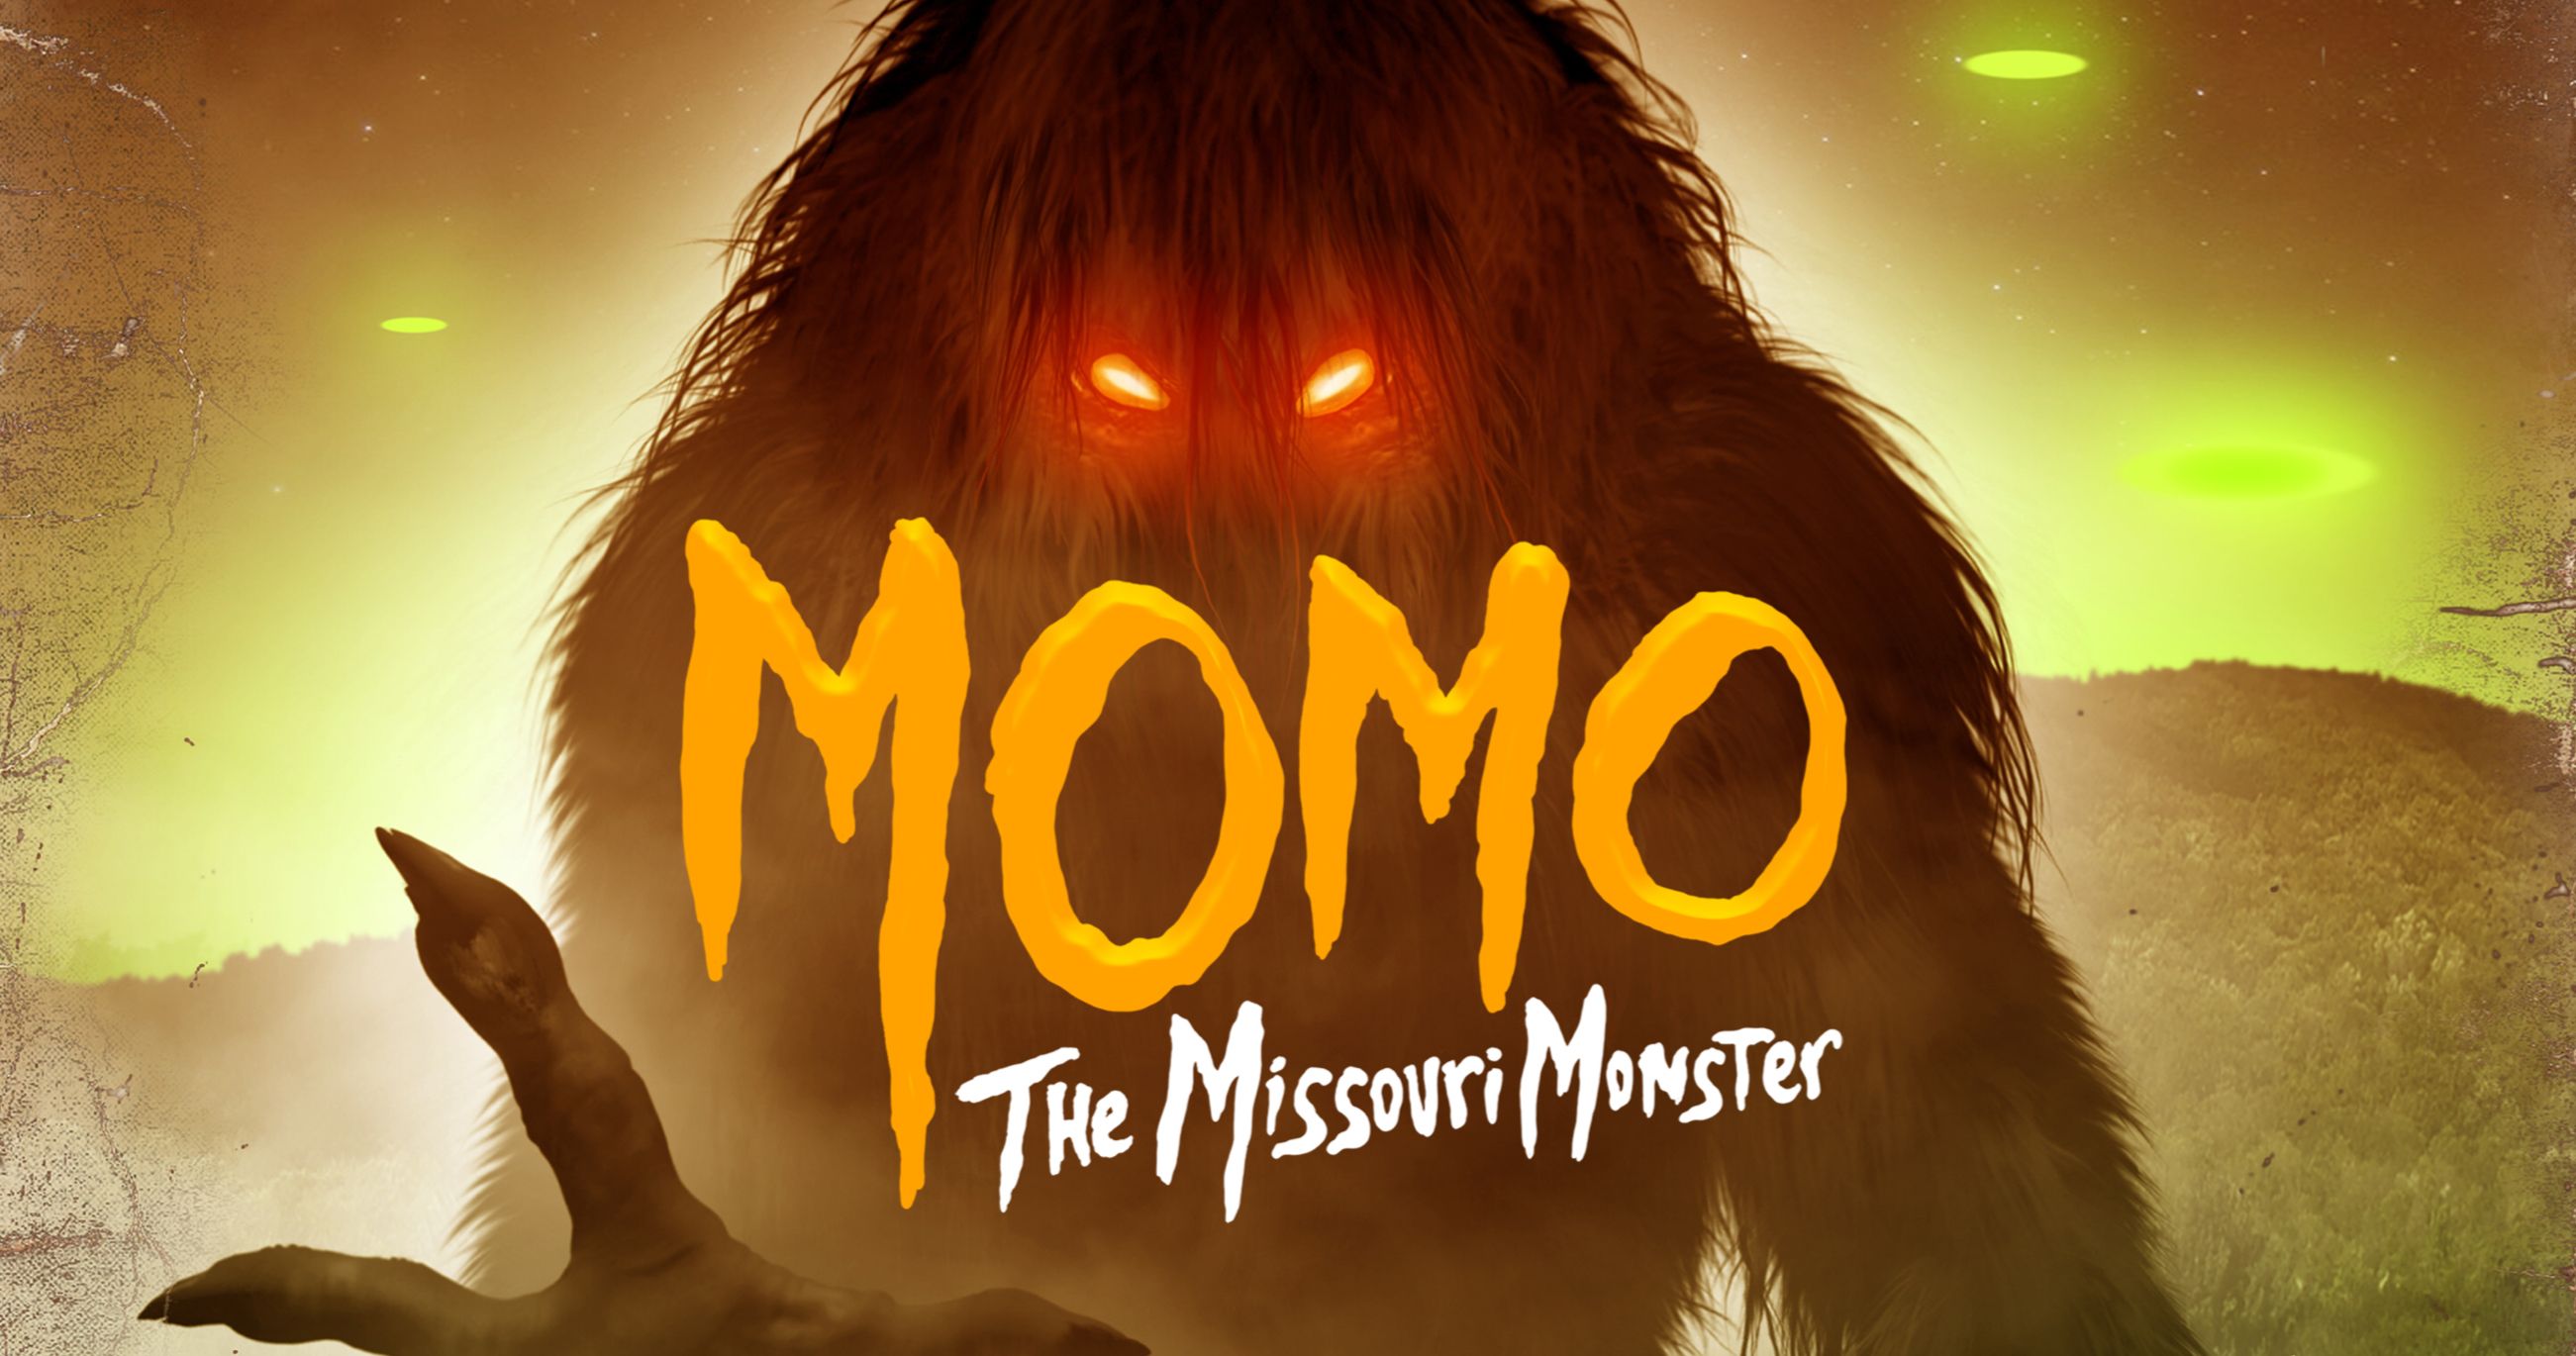 Momo: The Missouri Monster Review: A Fun and Unique Monster Documentary